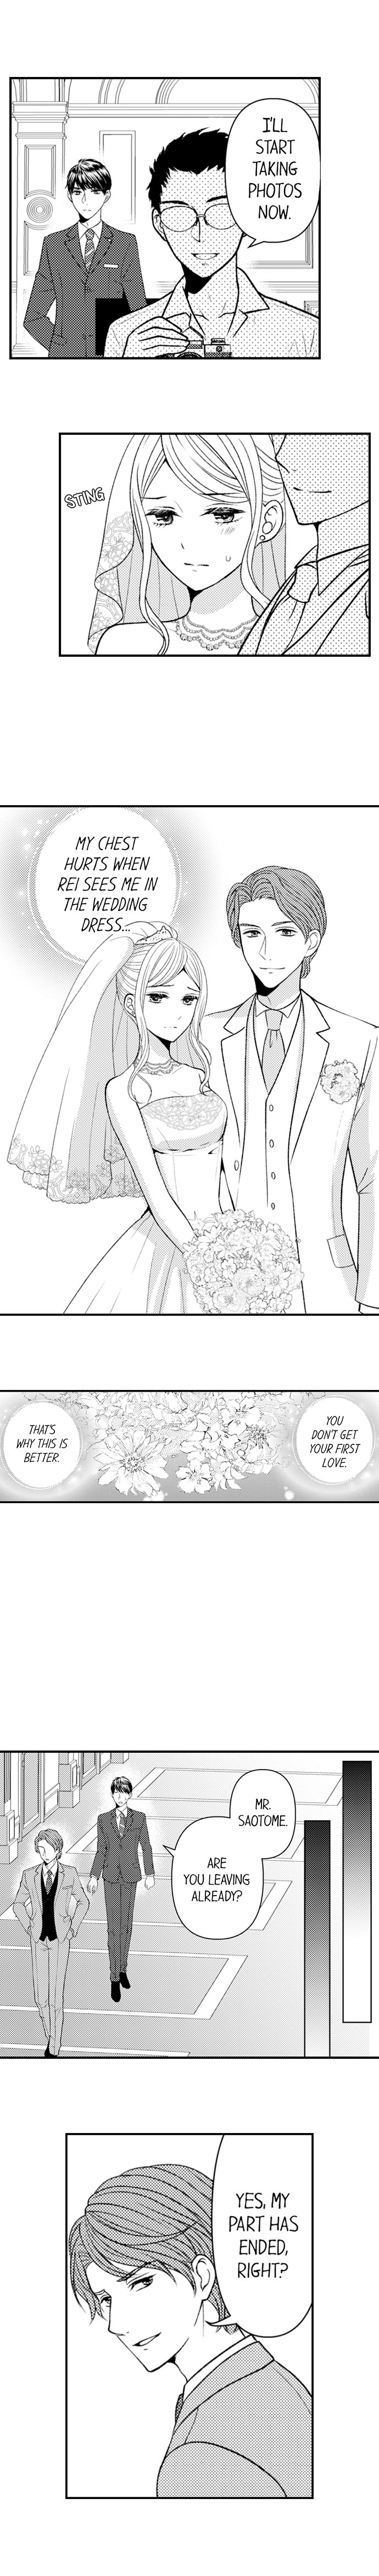 Cheating in a One-Sided Relationship - Chapter 10 Page 8